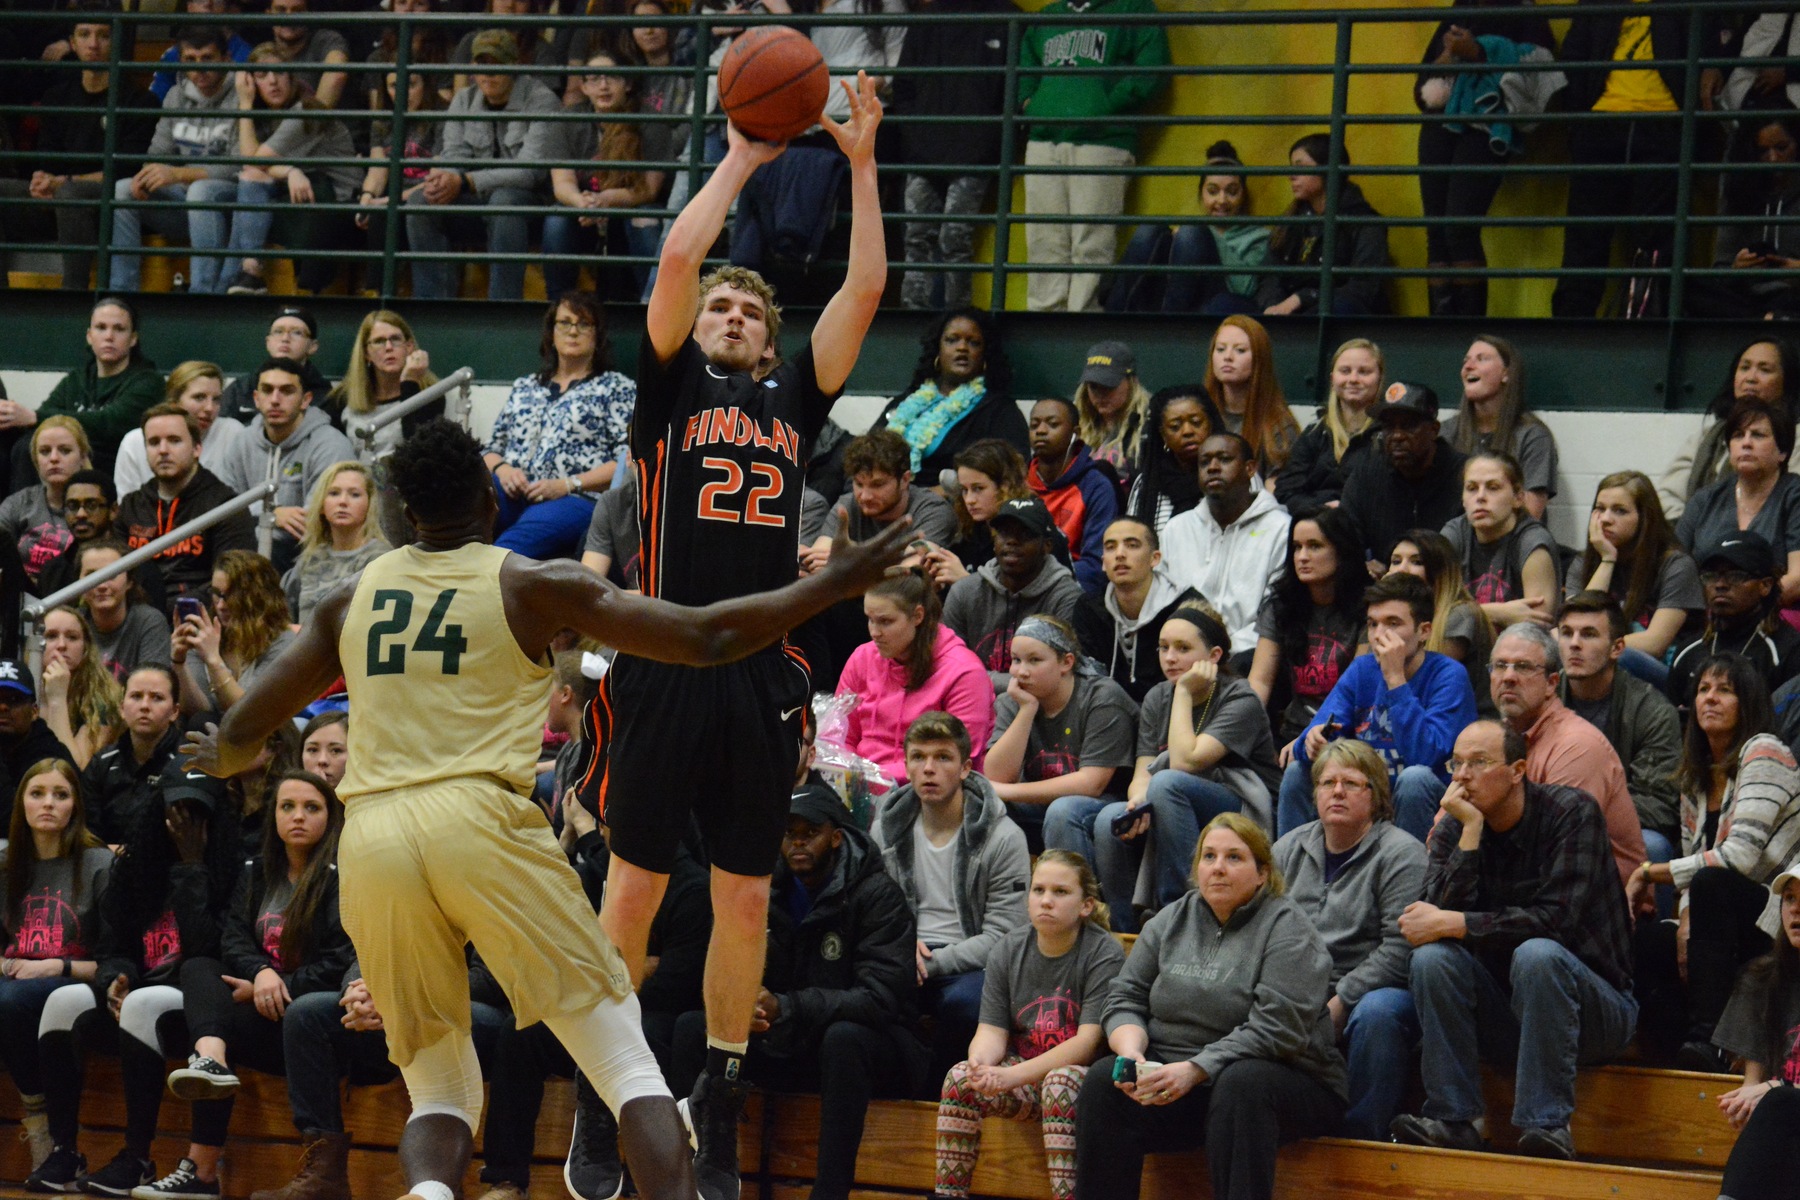 Elijah Kahlig scored 17 in the Oilers victory.